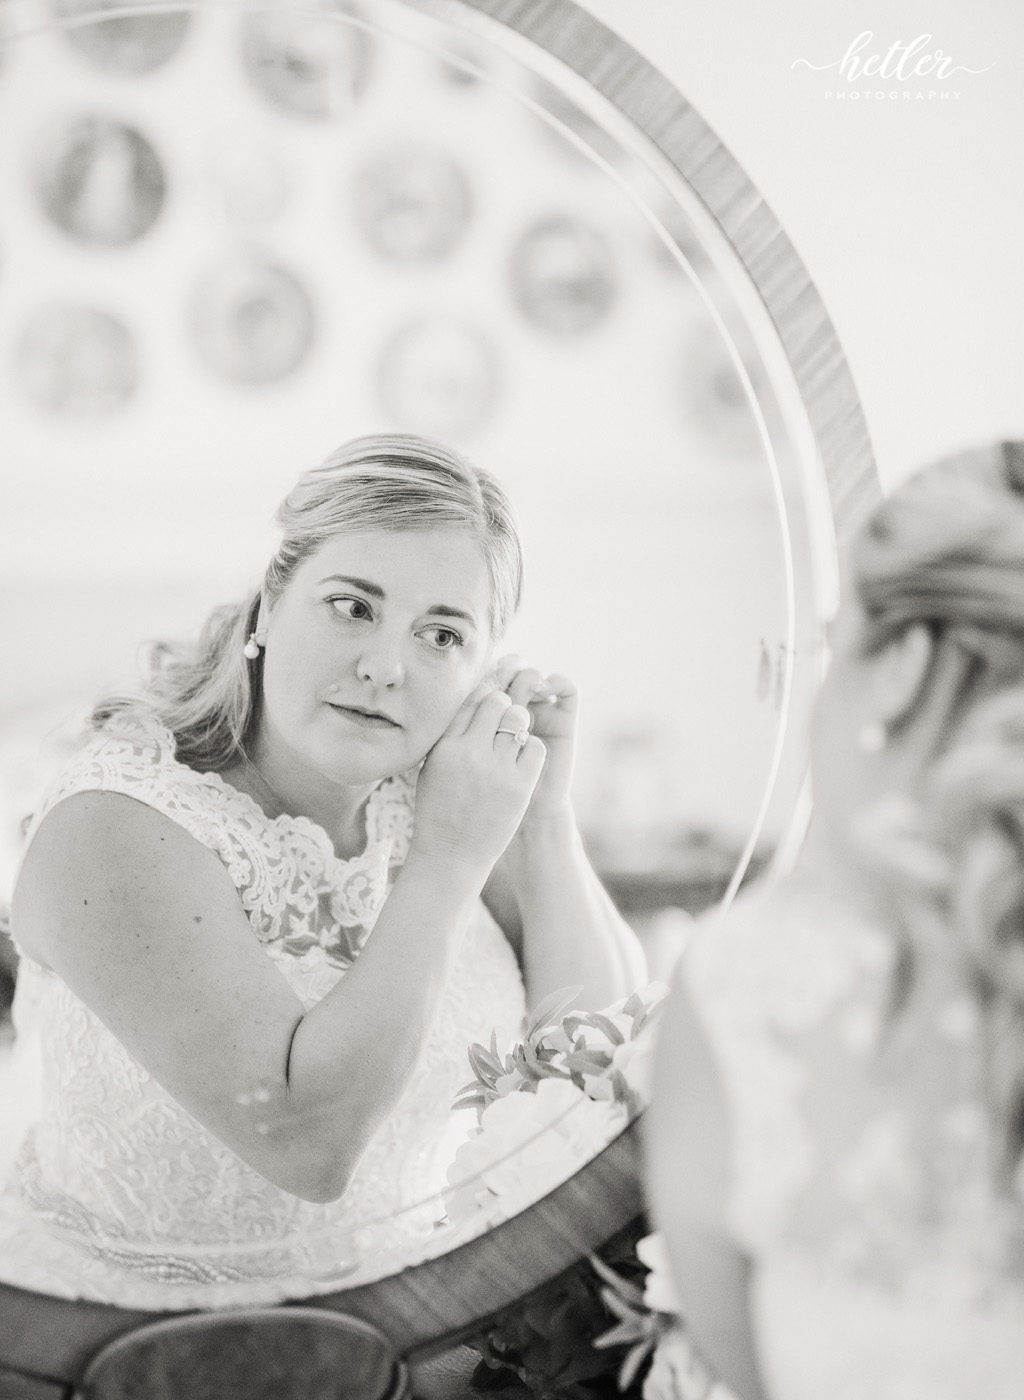 A summer Gerber Guest House wedding in Fremont Michigan with portraits at WatersEdge Golf Course